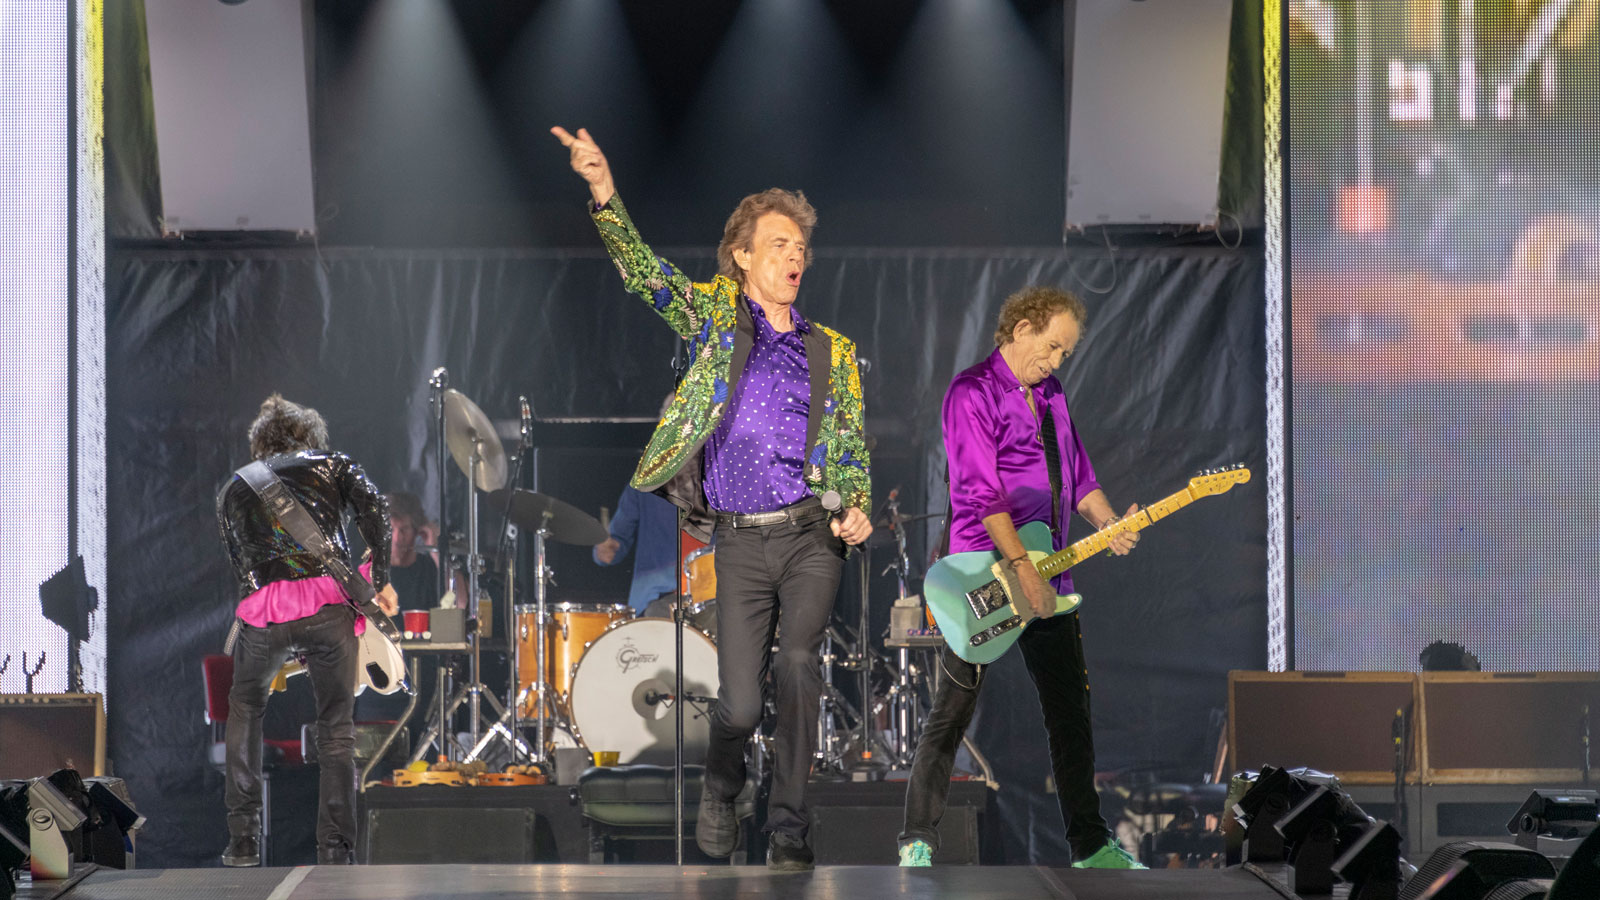 The Rolling Stones took the stage at the Rose Bowl on Aug. 22, 2019. NASA's Mars InSight lander team named a Martian rock "Rolling Stones Rock."